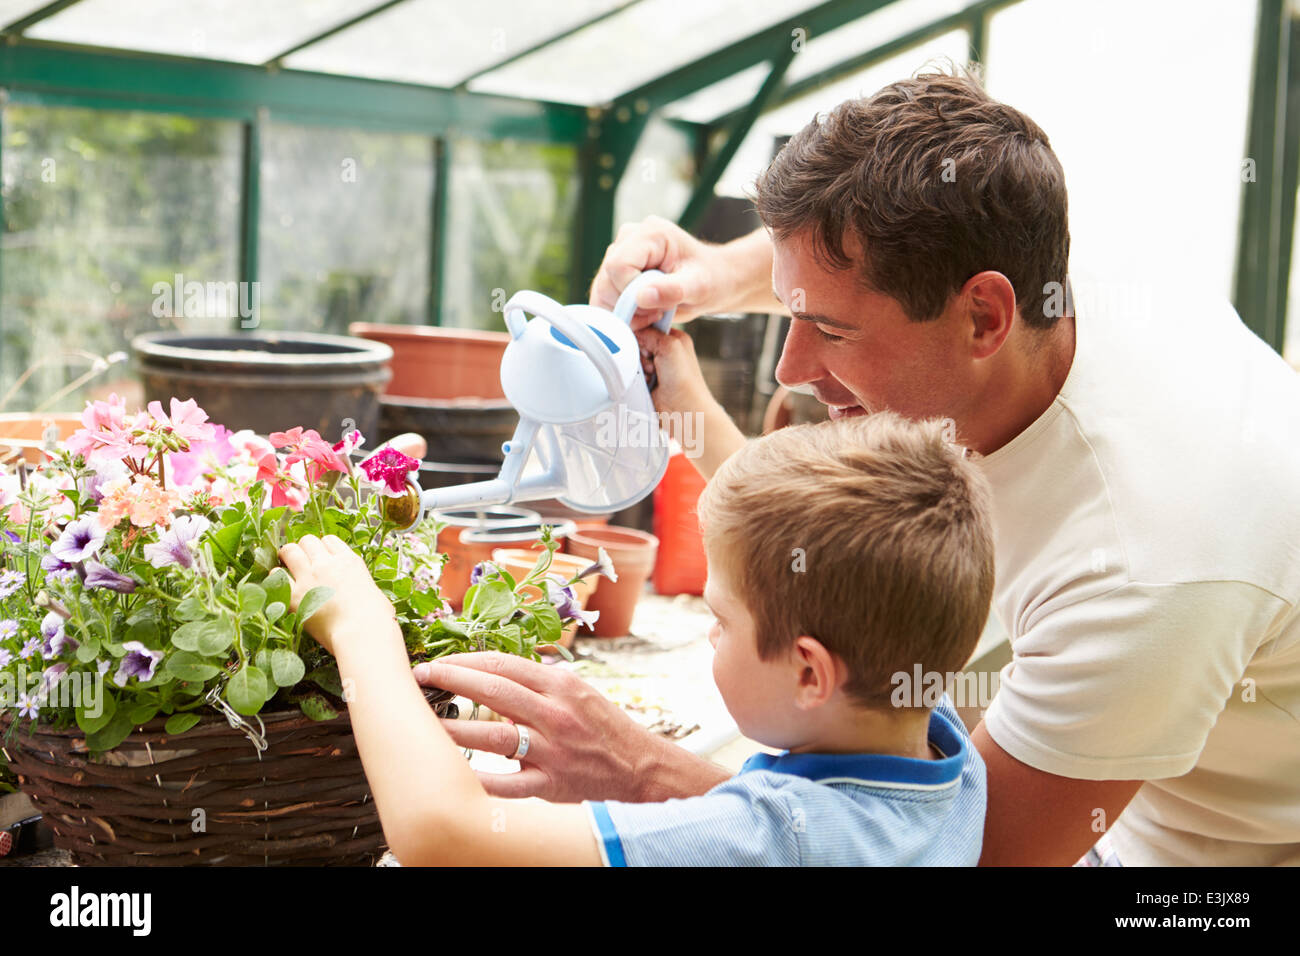 Father And Son Watering Plants In Greenhouse Stock Photo